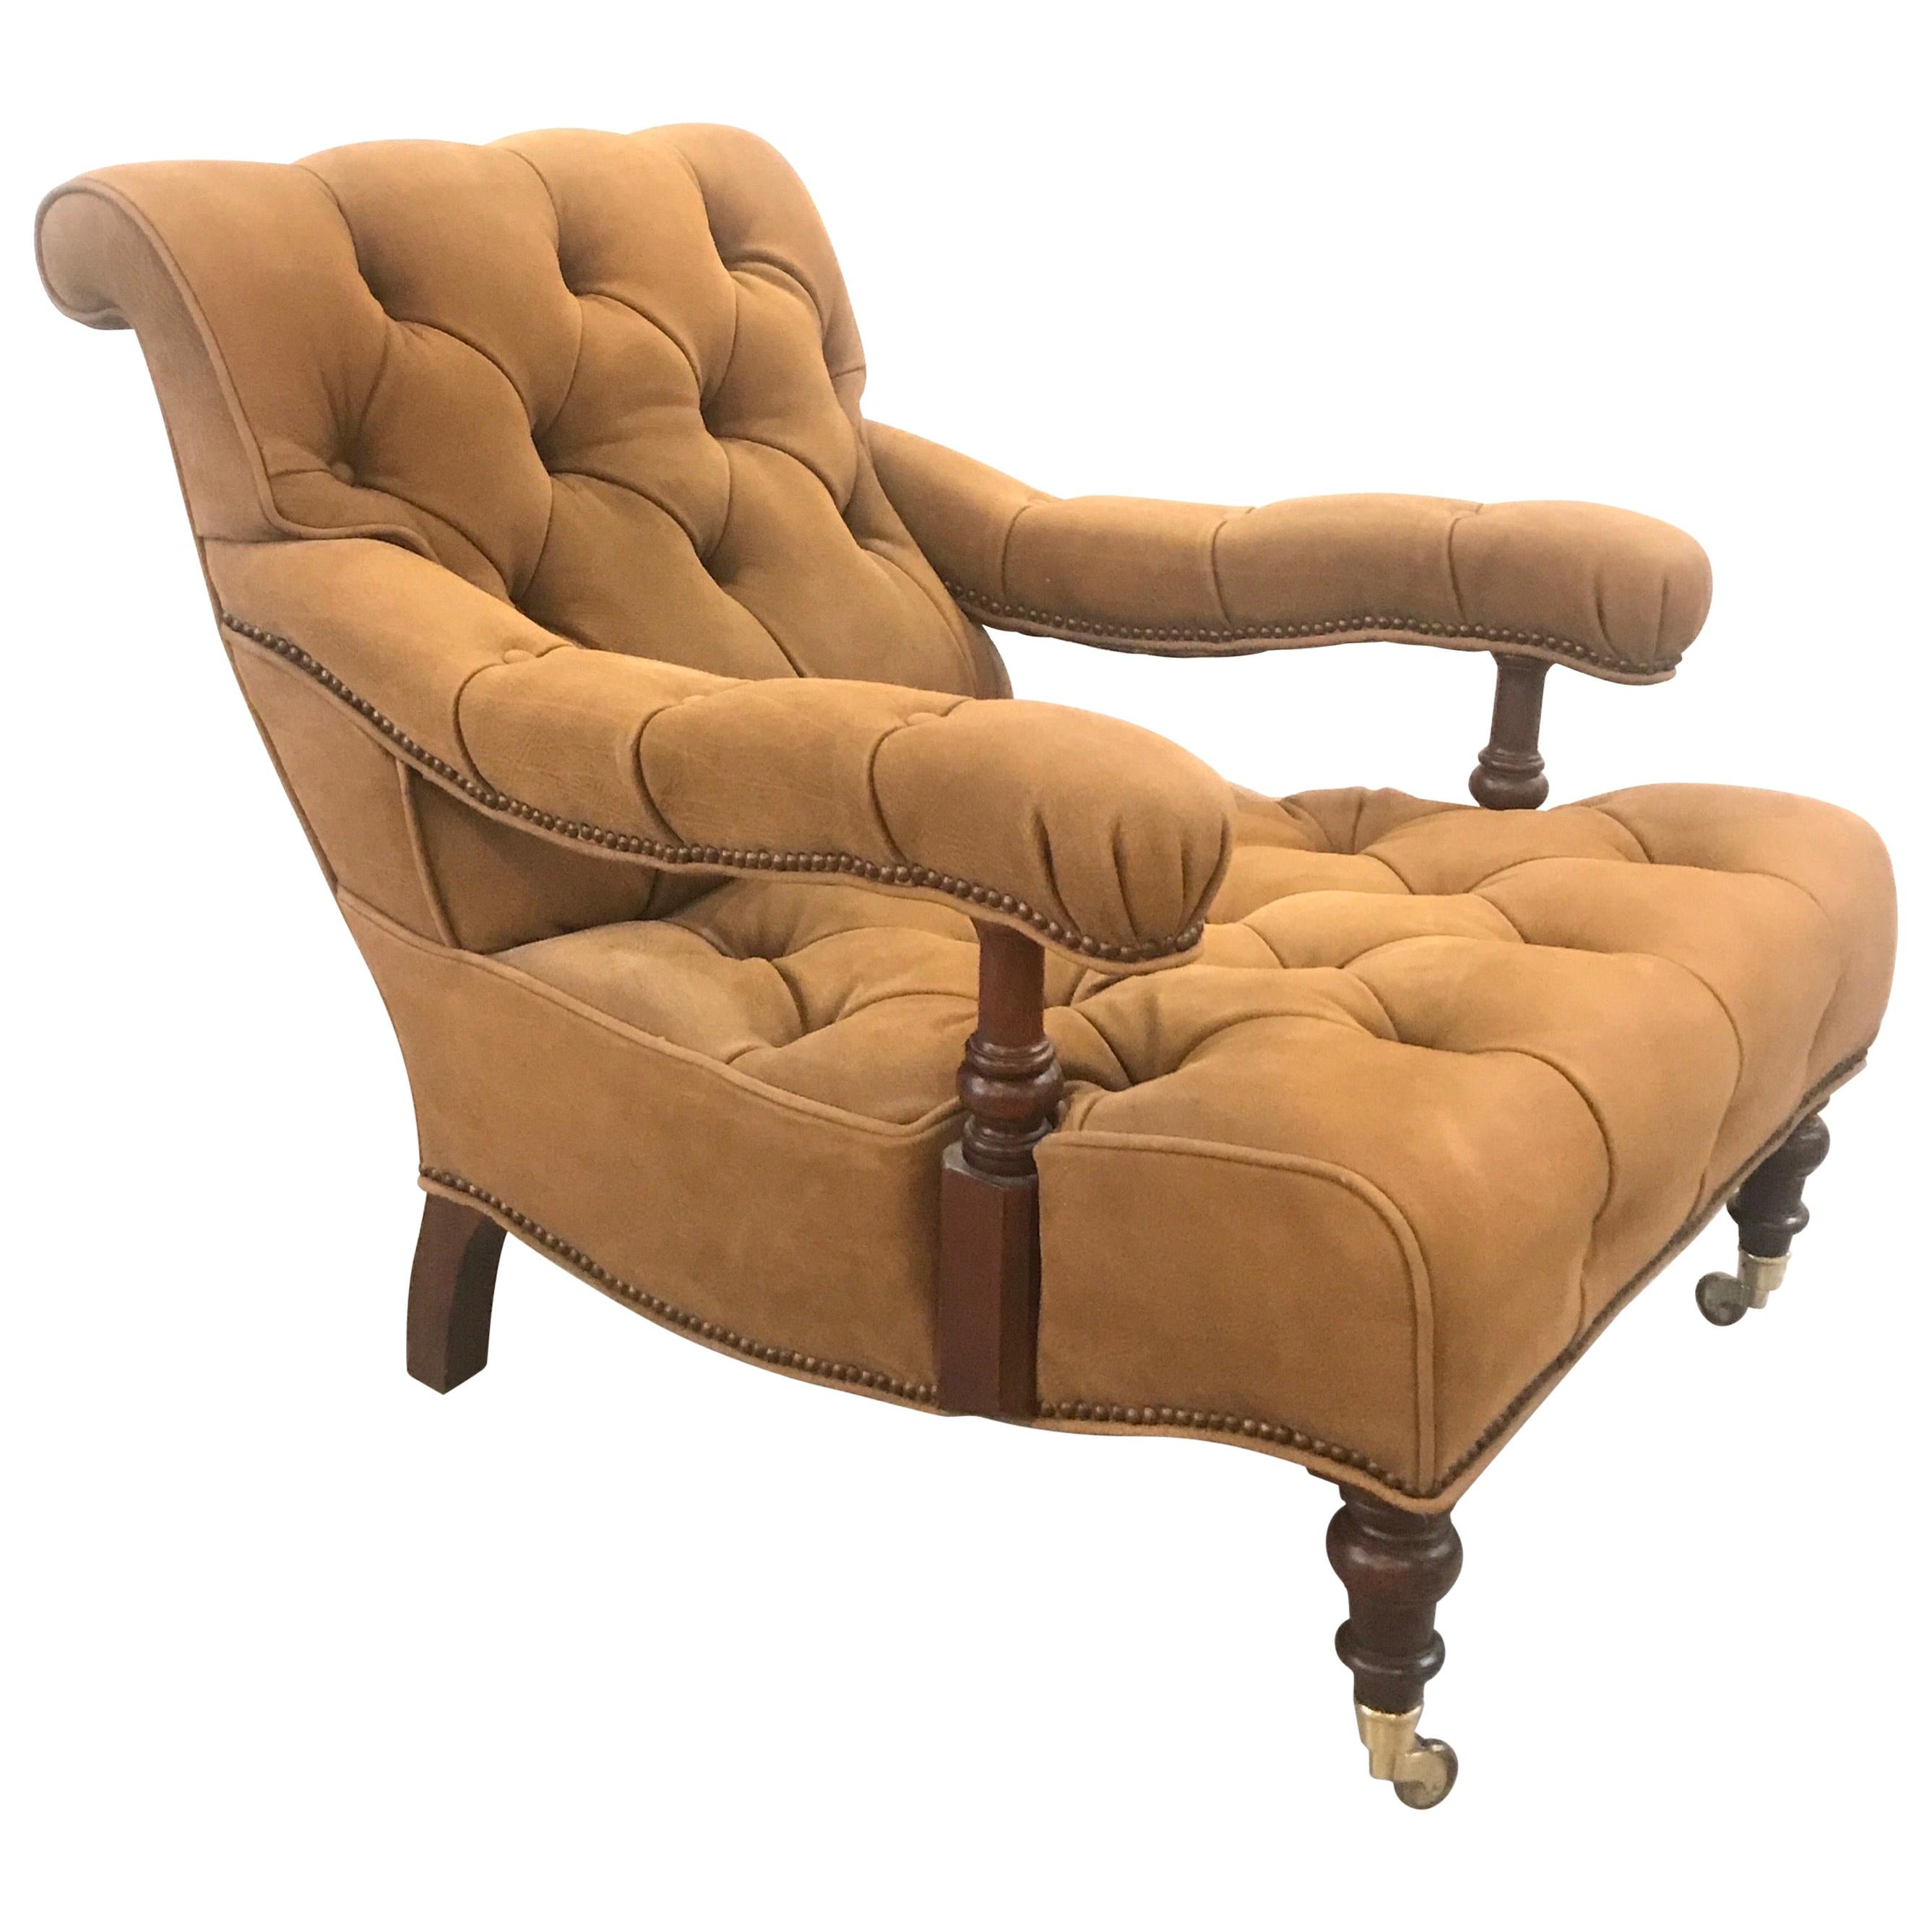 Leather and Nail Head Trim Lounge Chair